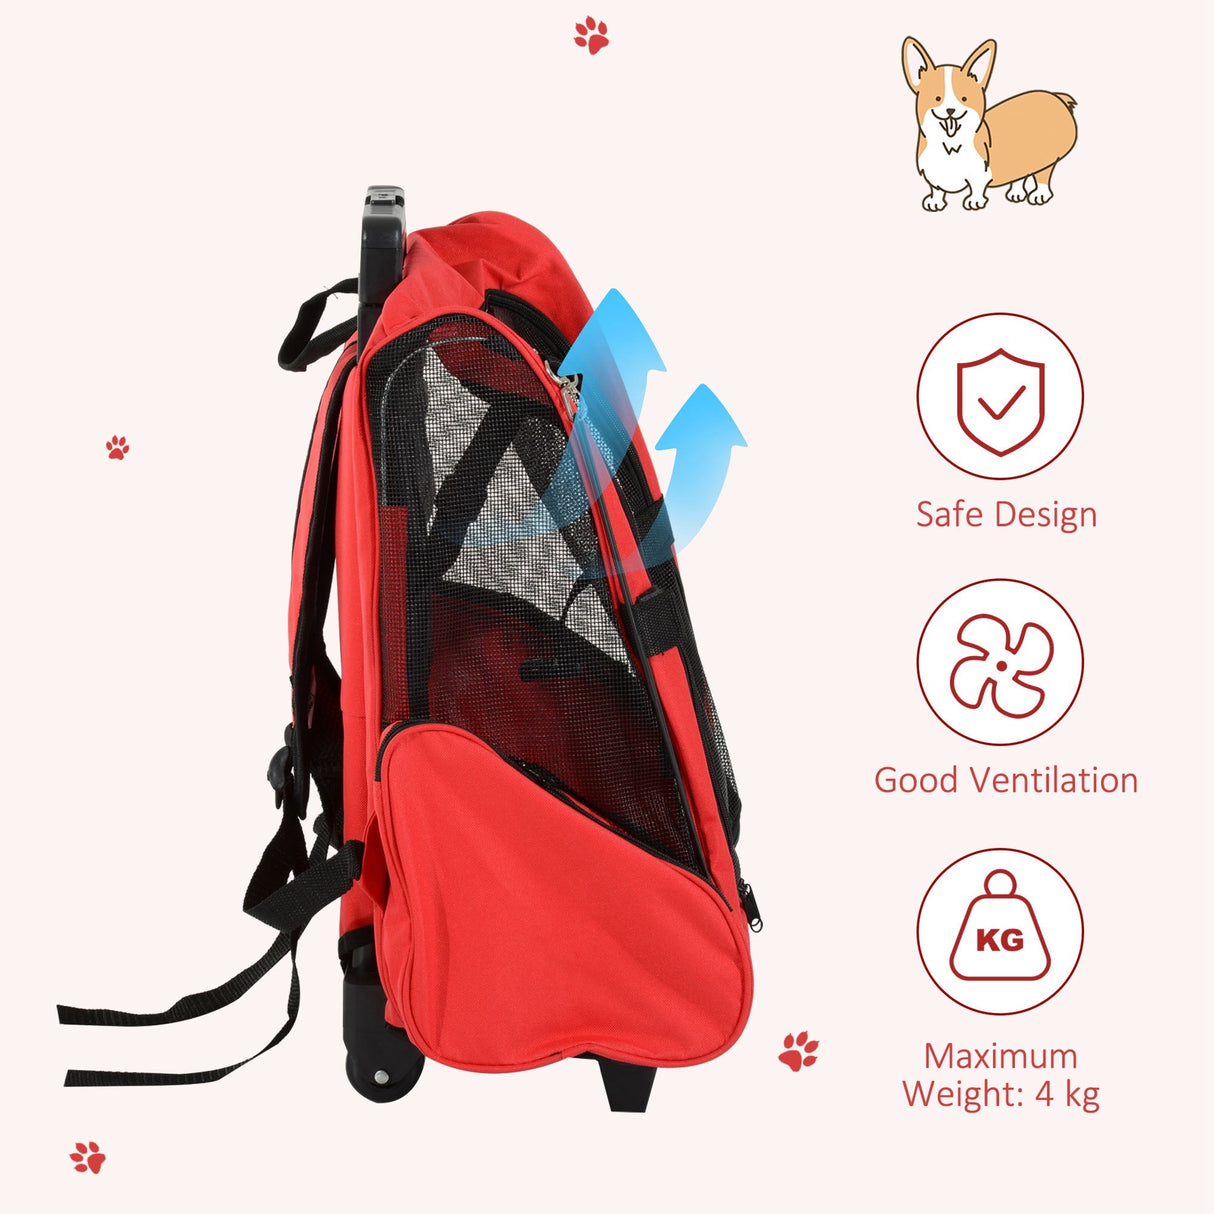 Pet Carrier Travel Backpack For Cats or Dogs with Trolley and Telescopic Handle, PawHut, Blue